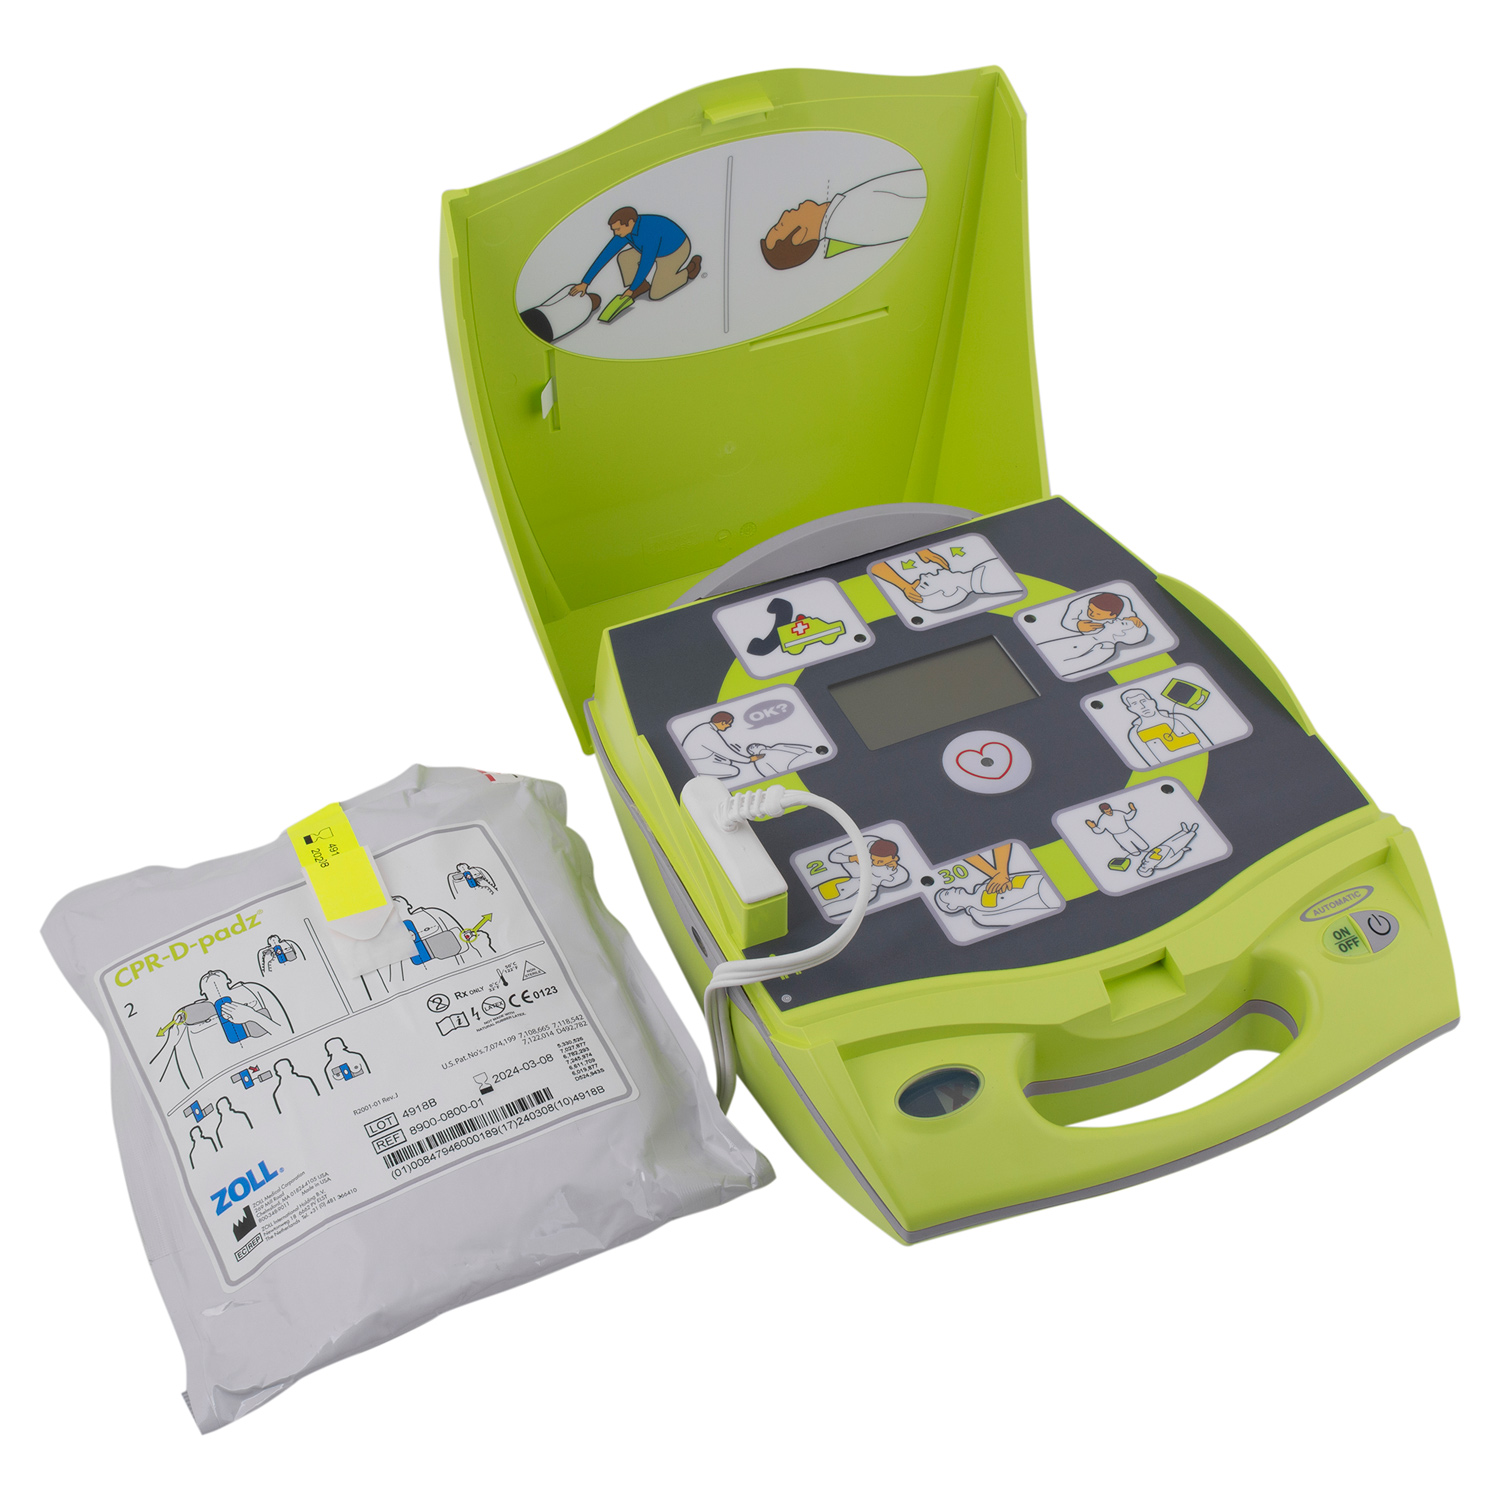 Zoll Aed Plus Fully Automatic Defibrillator With Carry Case